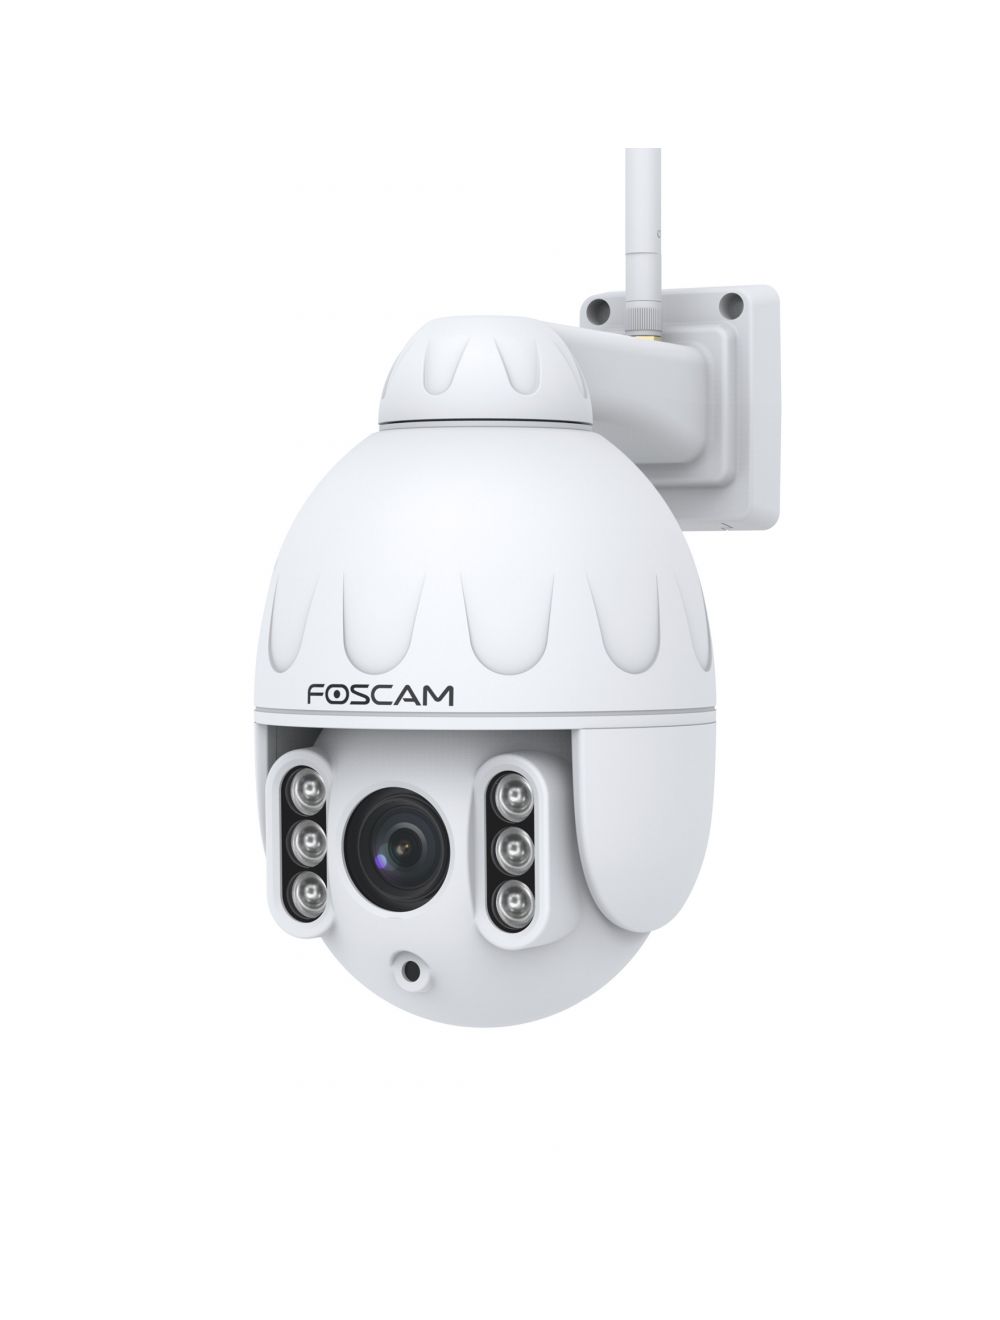 Foscam 1080P Wireless Wifi Home Security Camera Night Vision Human Detection P2P 